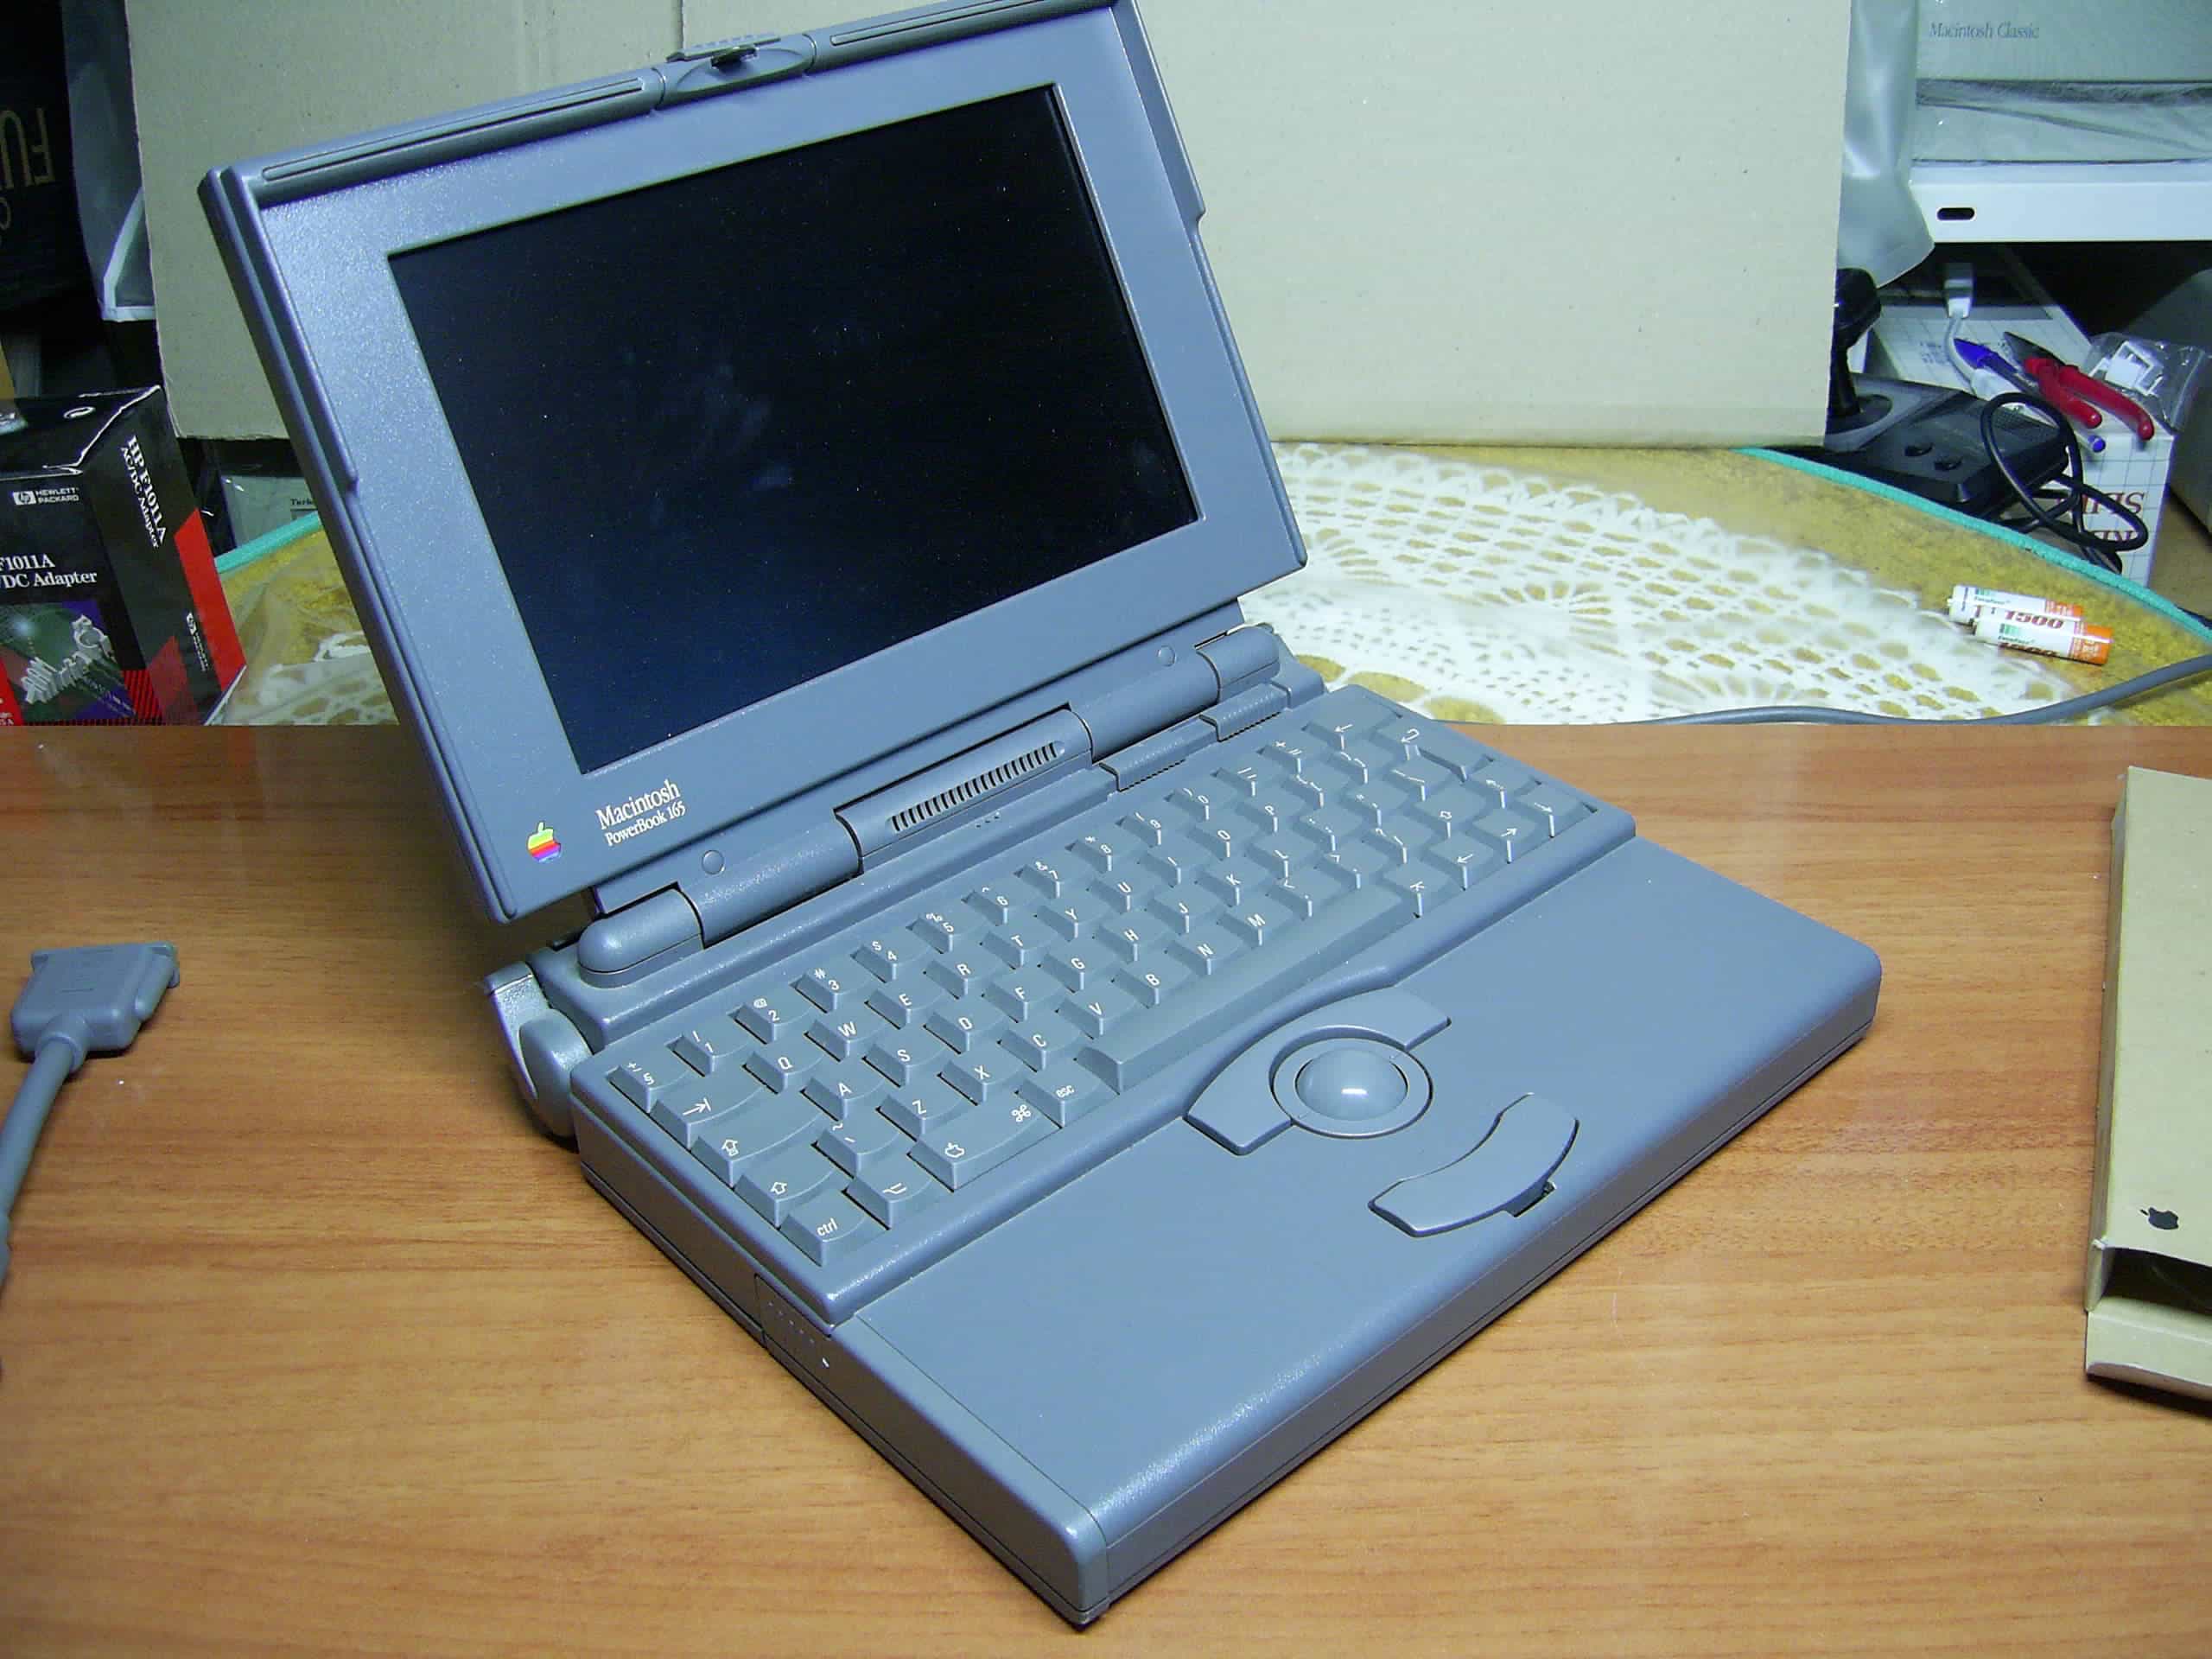 PowerBook 165 was Apple's most affordable laptop.